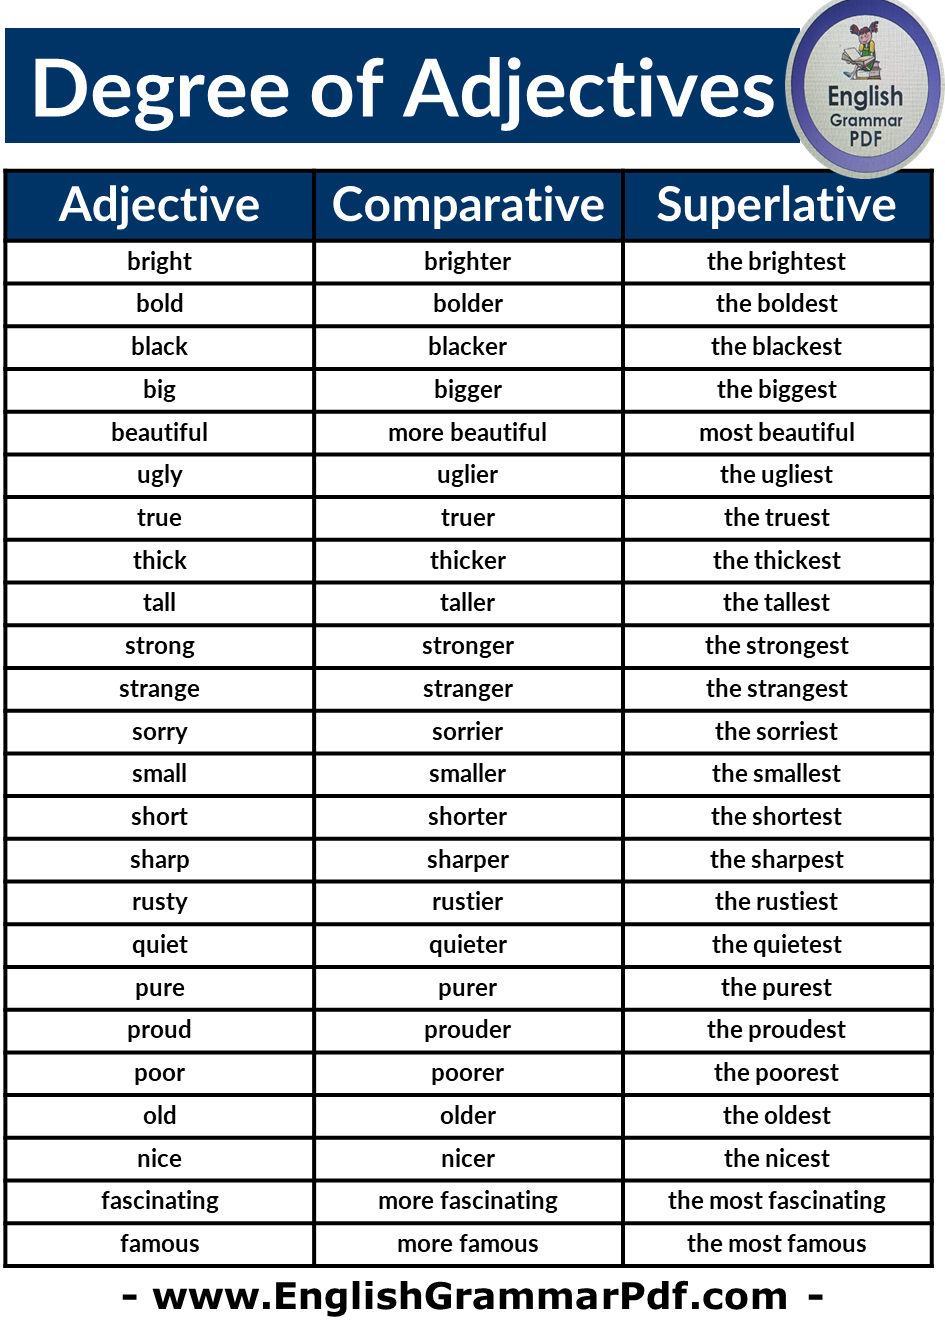 Английский язык comparative superlative. Adjective Comparative Superlative таблица. Degrees of adjectives. Positive Comparative Superlative таблица. Degrees of Comparison of adjectives.